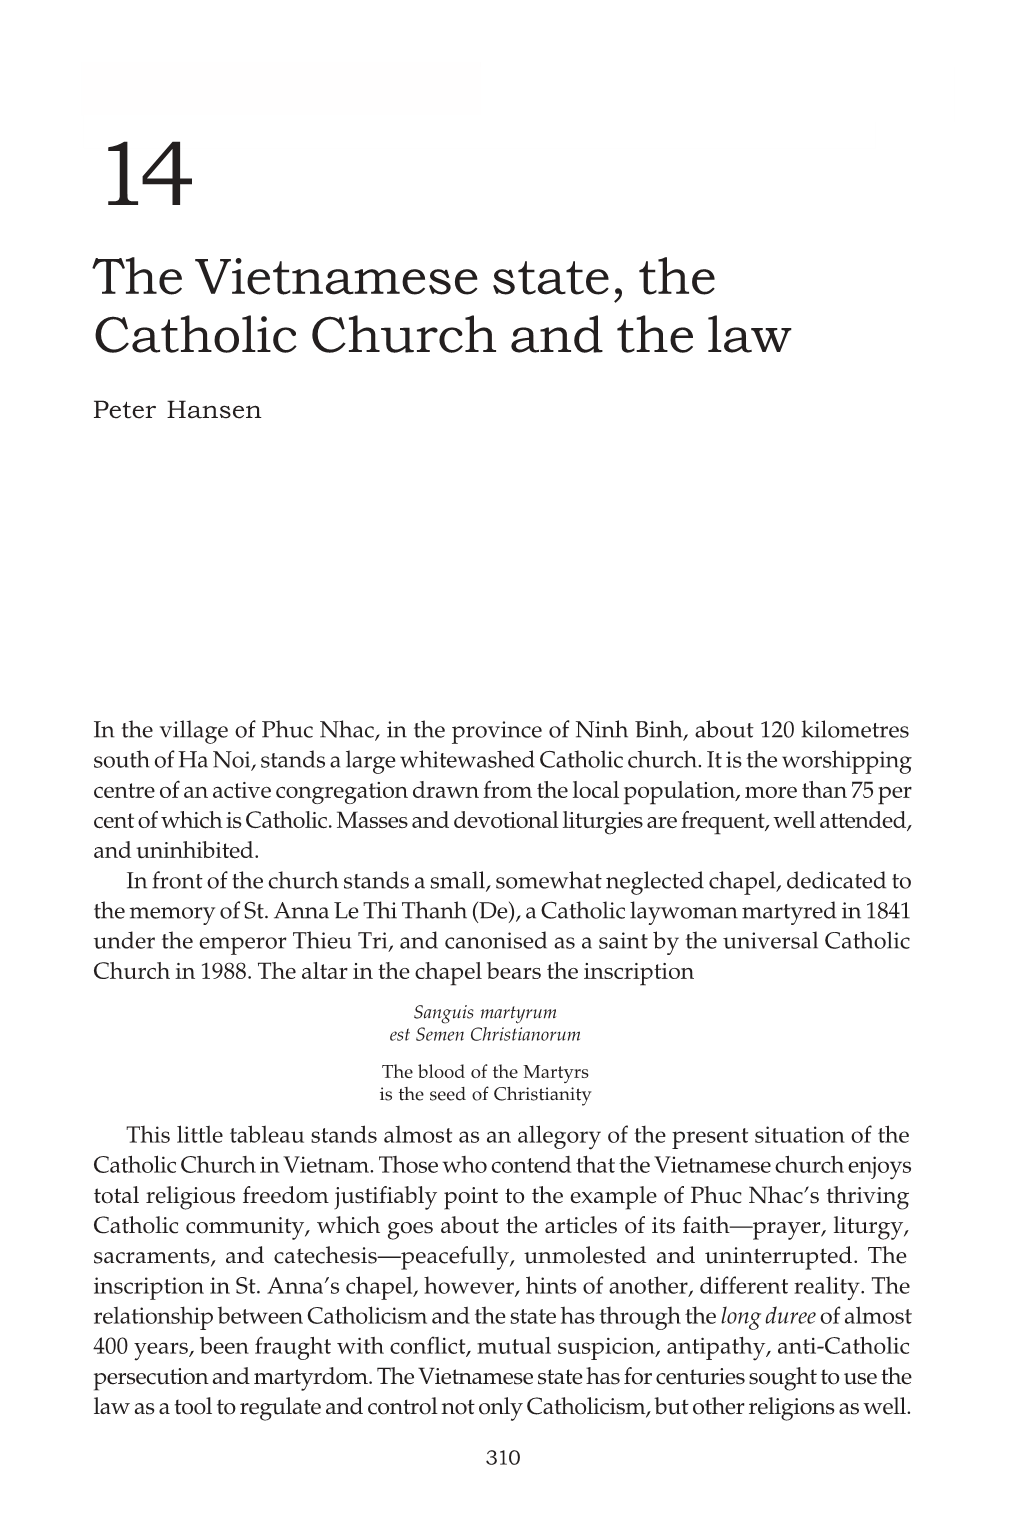 The Vietnamese State, the Catholic Church and the Law